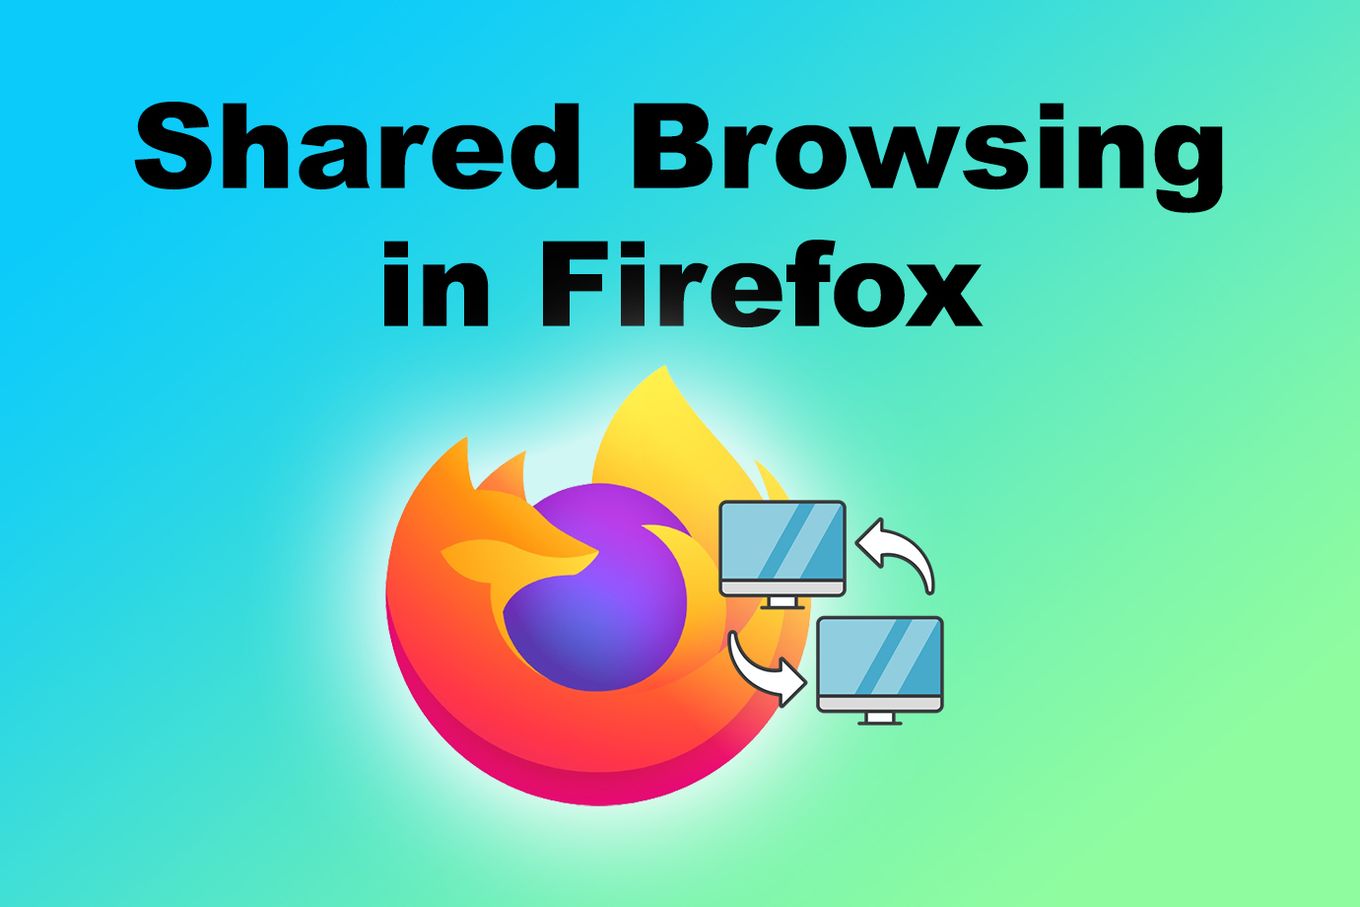 Shared Browsing in Firefox